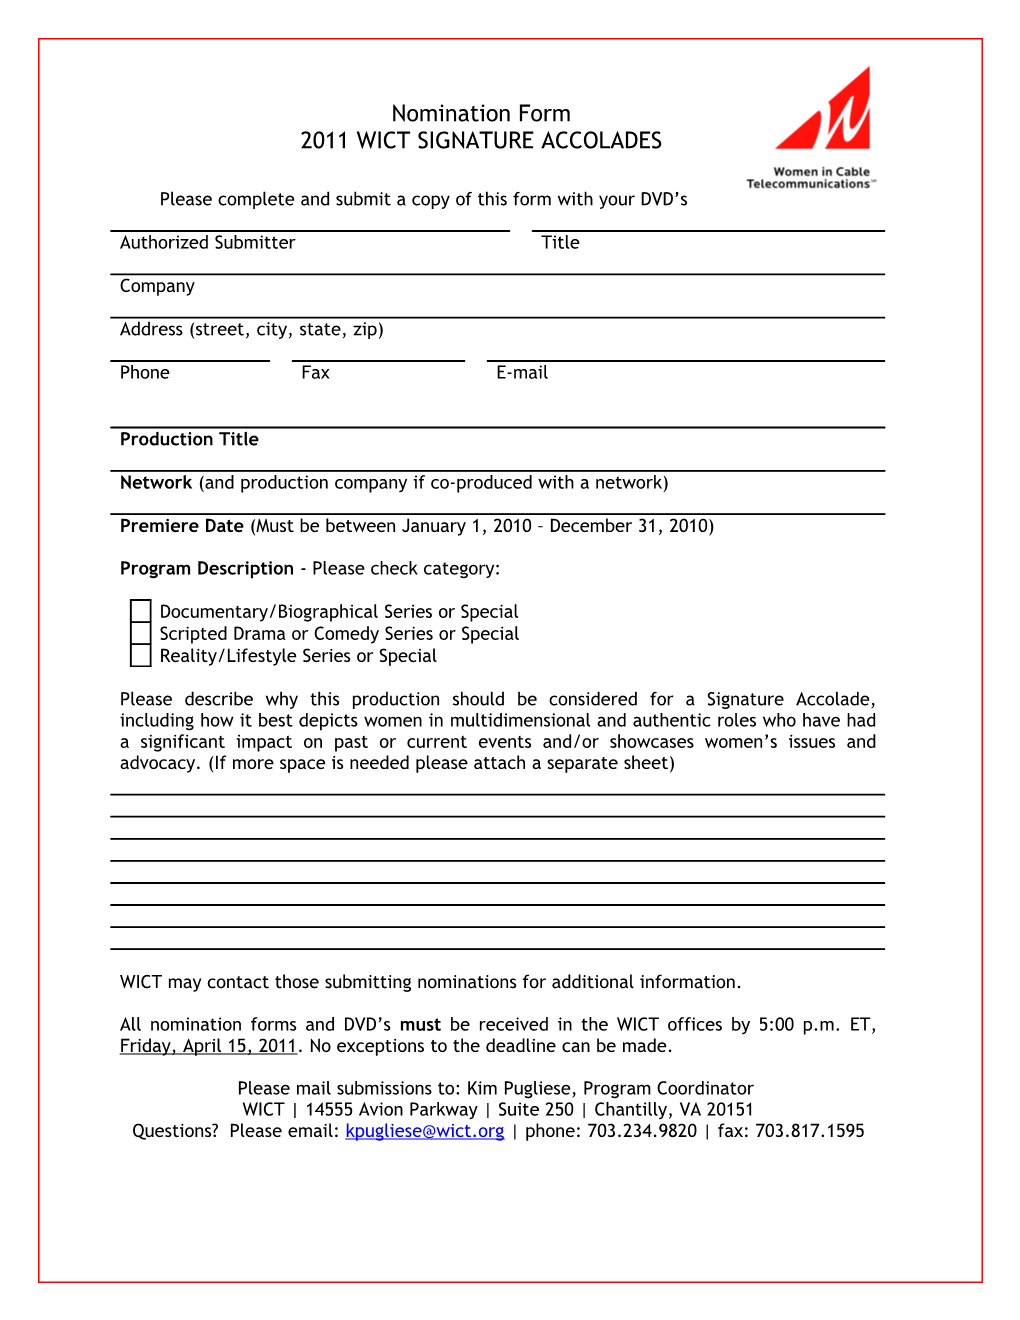 Please Complete and Submit a Copy of This Form with Your DVD S